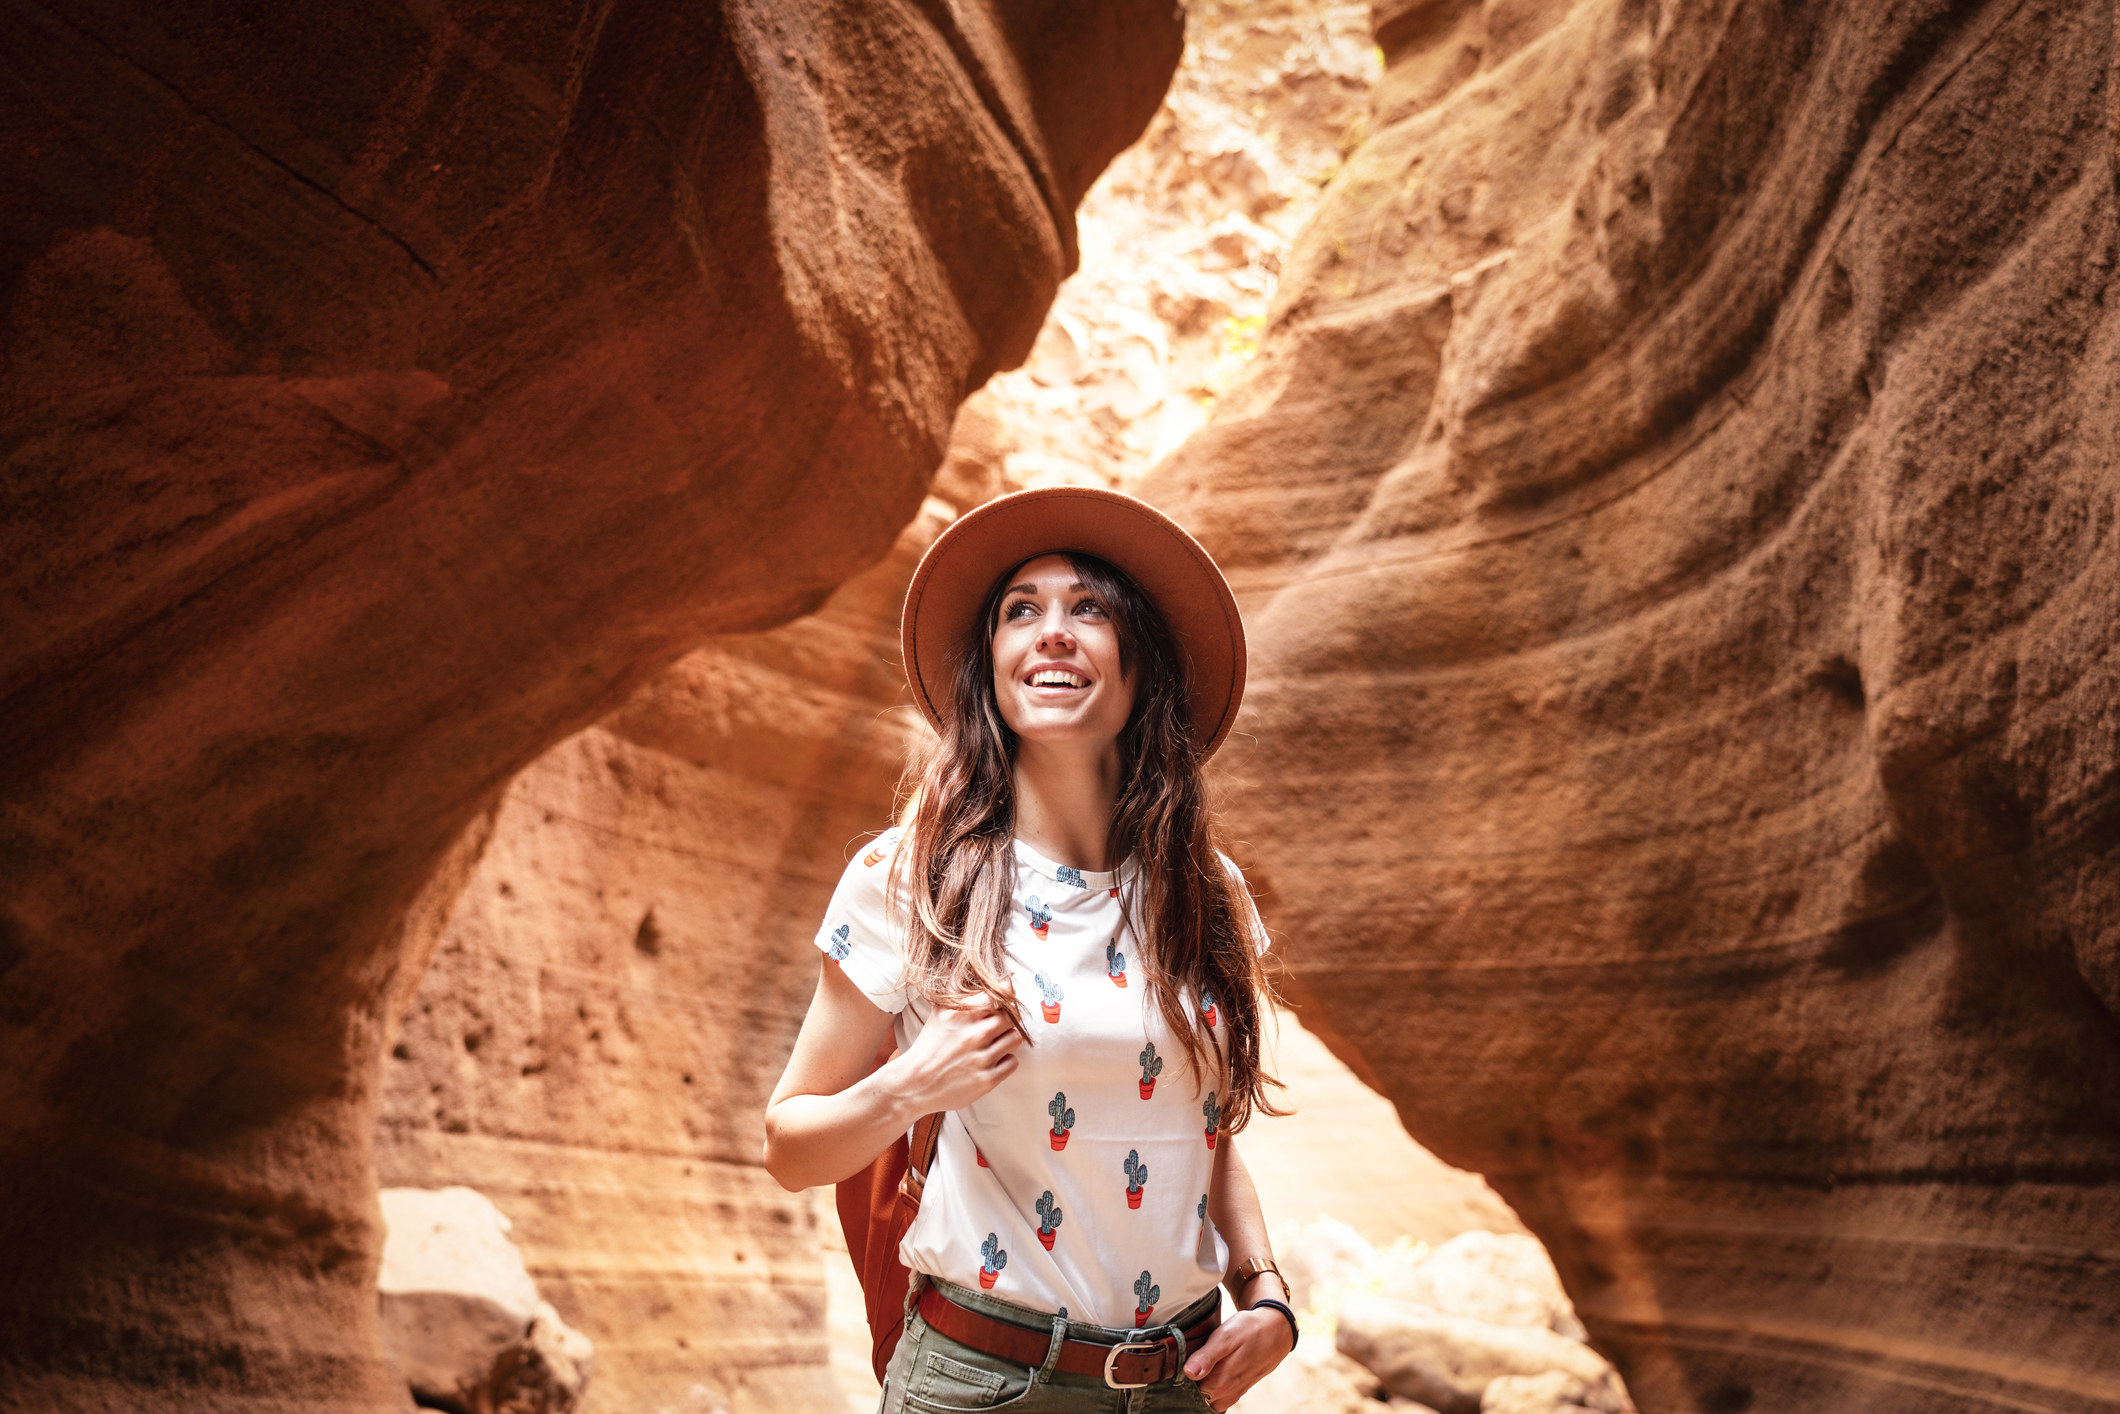 a woman smiling while in a desert canyon